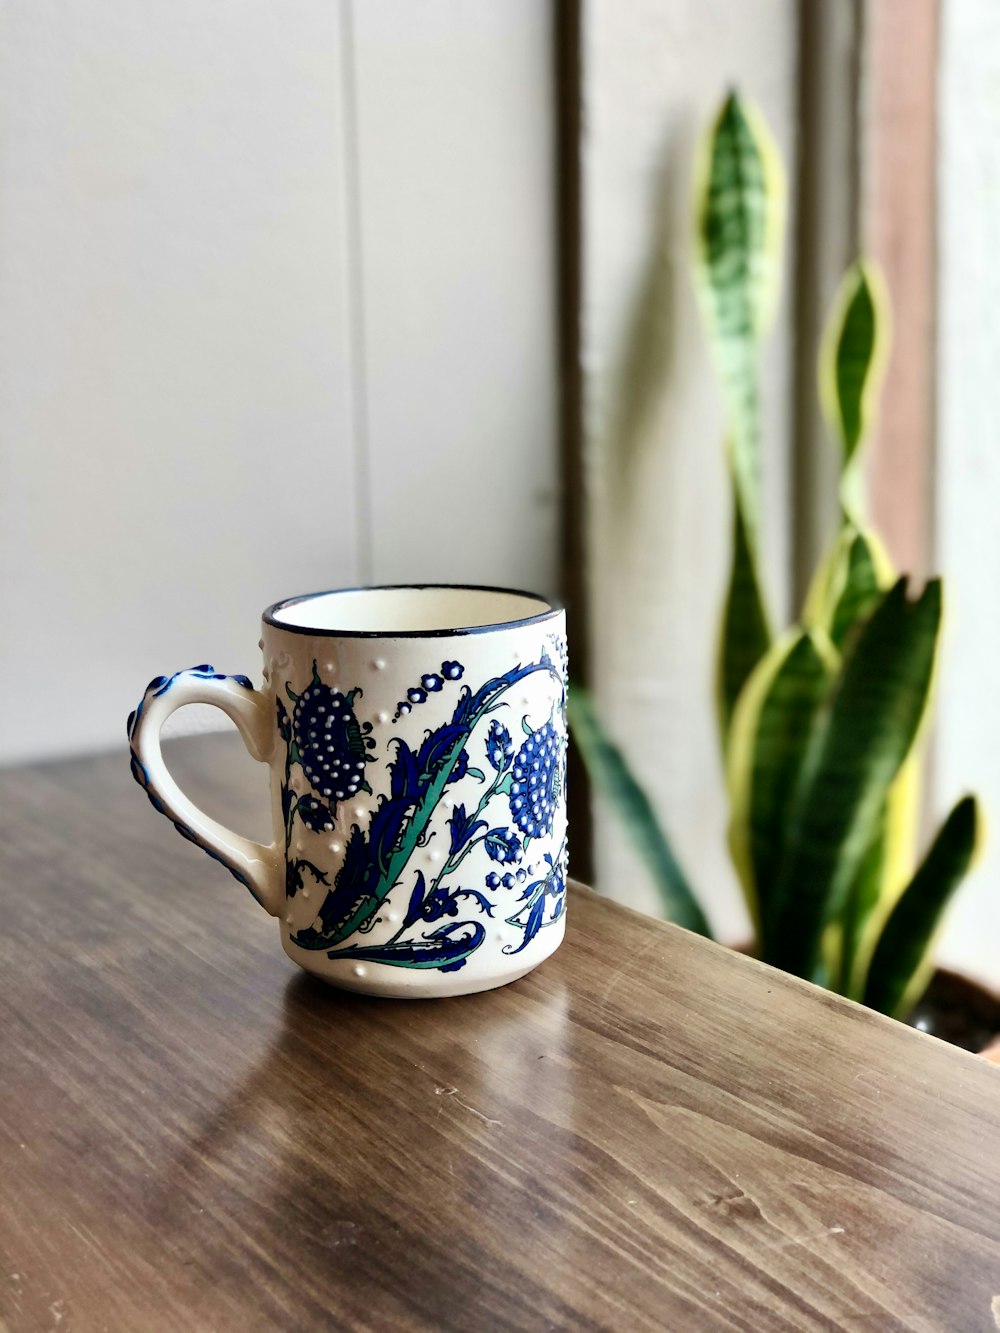 white blue and green floral ceramic mug on brown wooden table